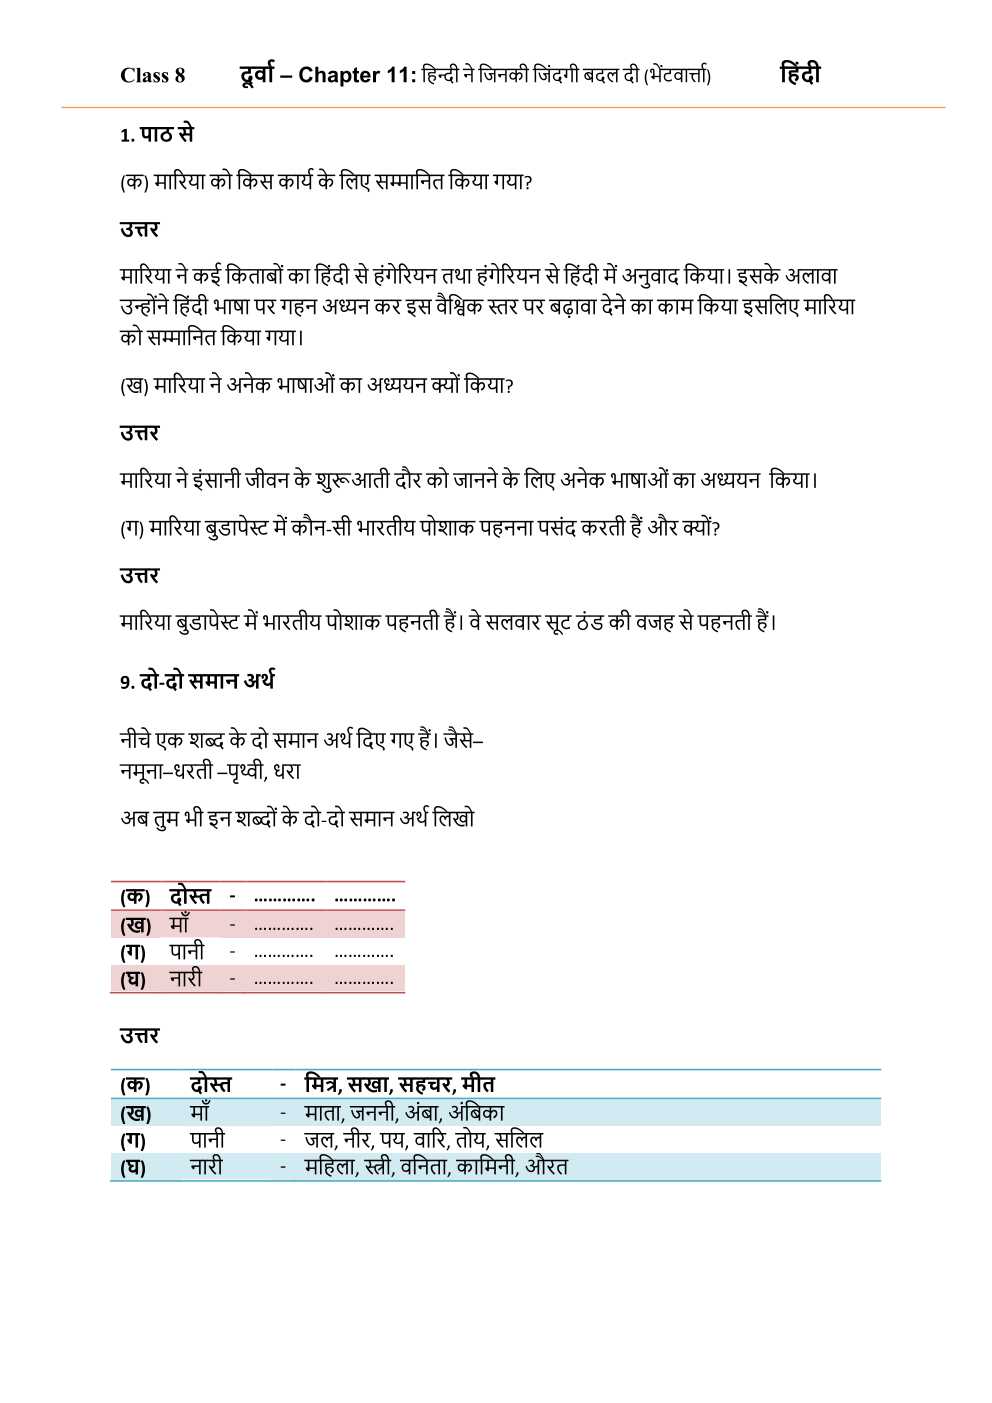 NCERT Solutions For Class 8 Hindi Durva Chapter 11